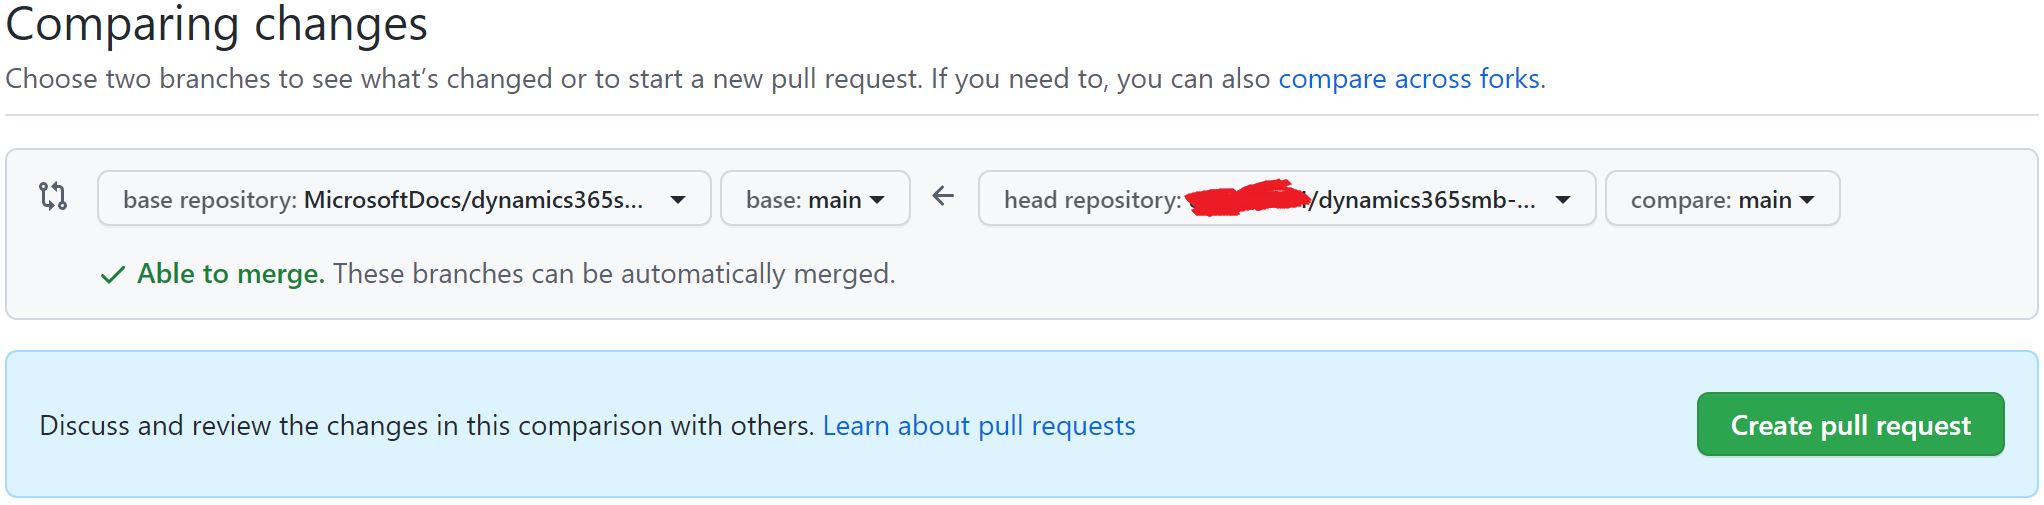 The start of a pull request with fork on the right and target to the left.